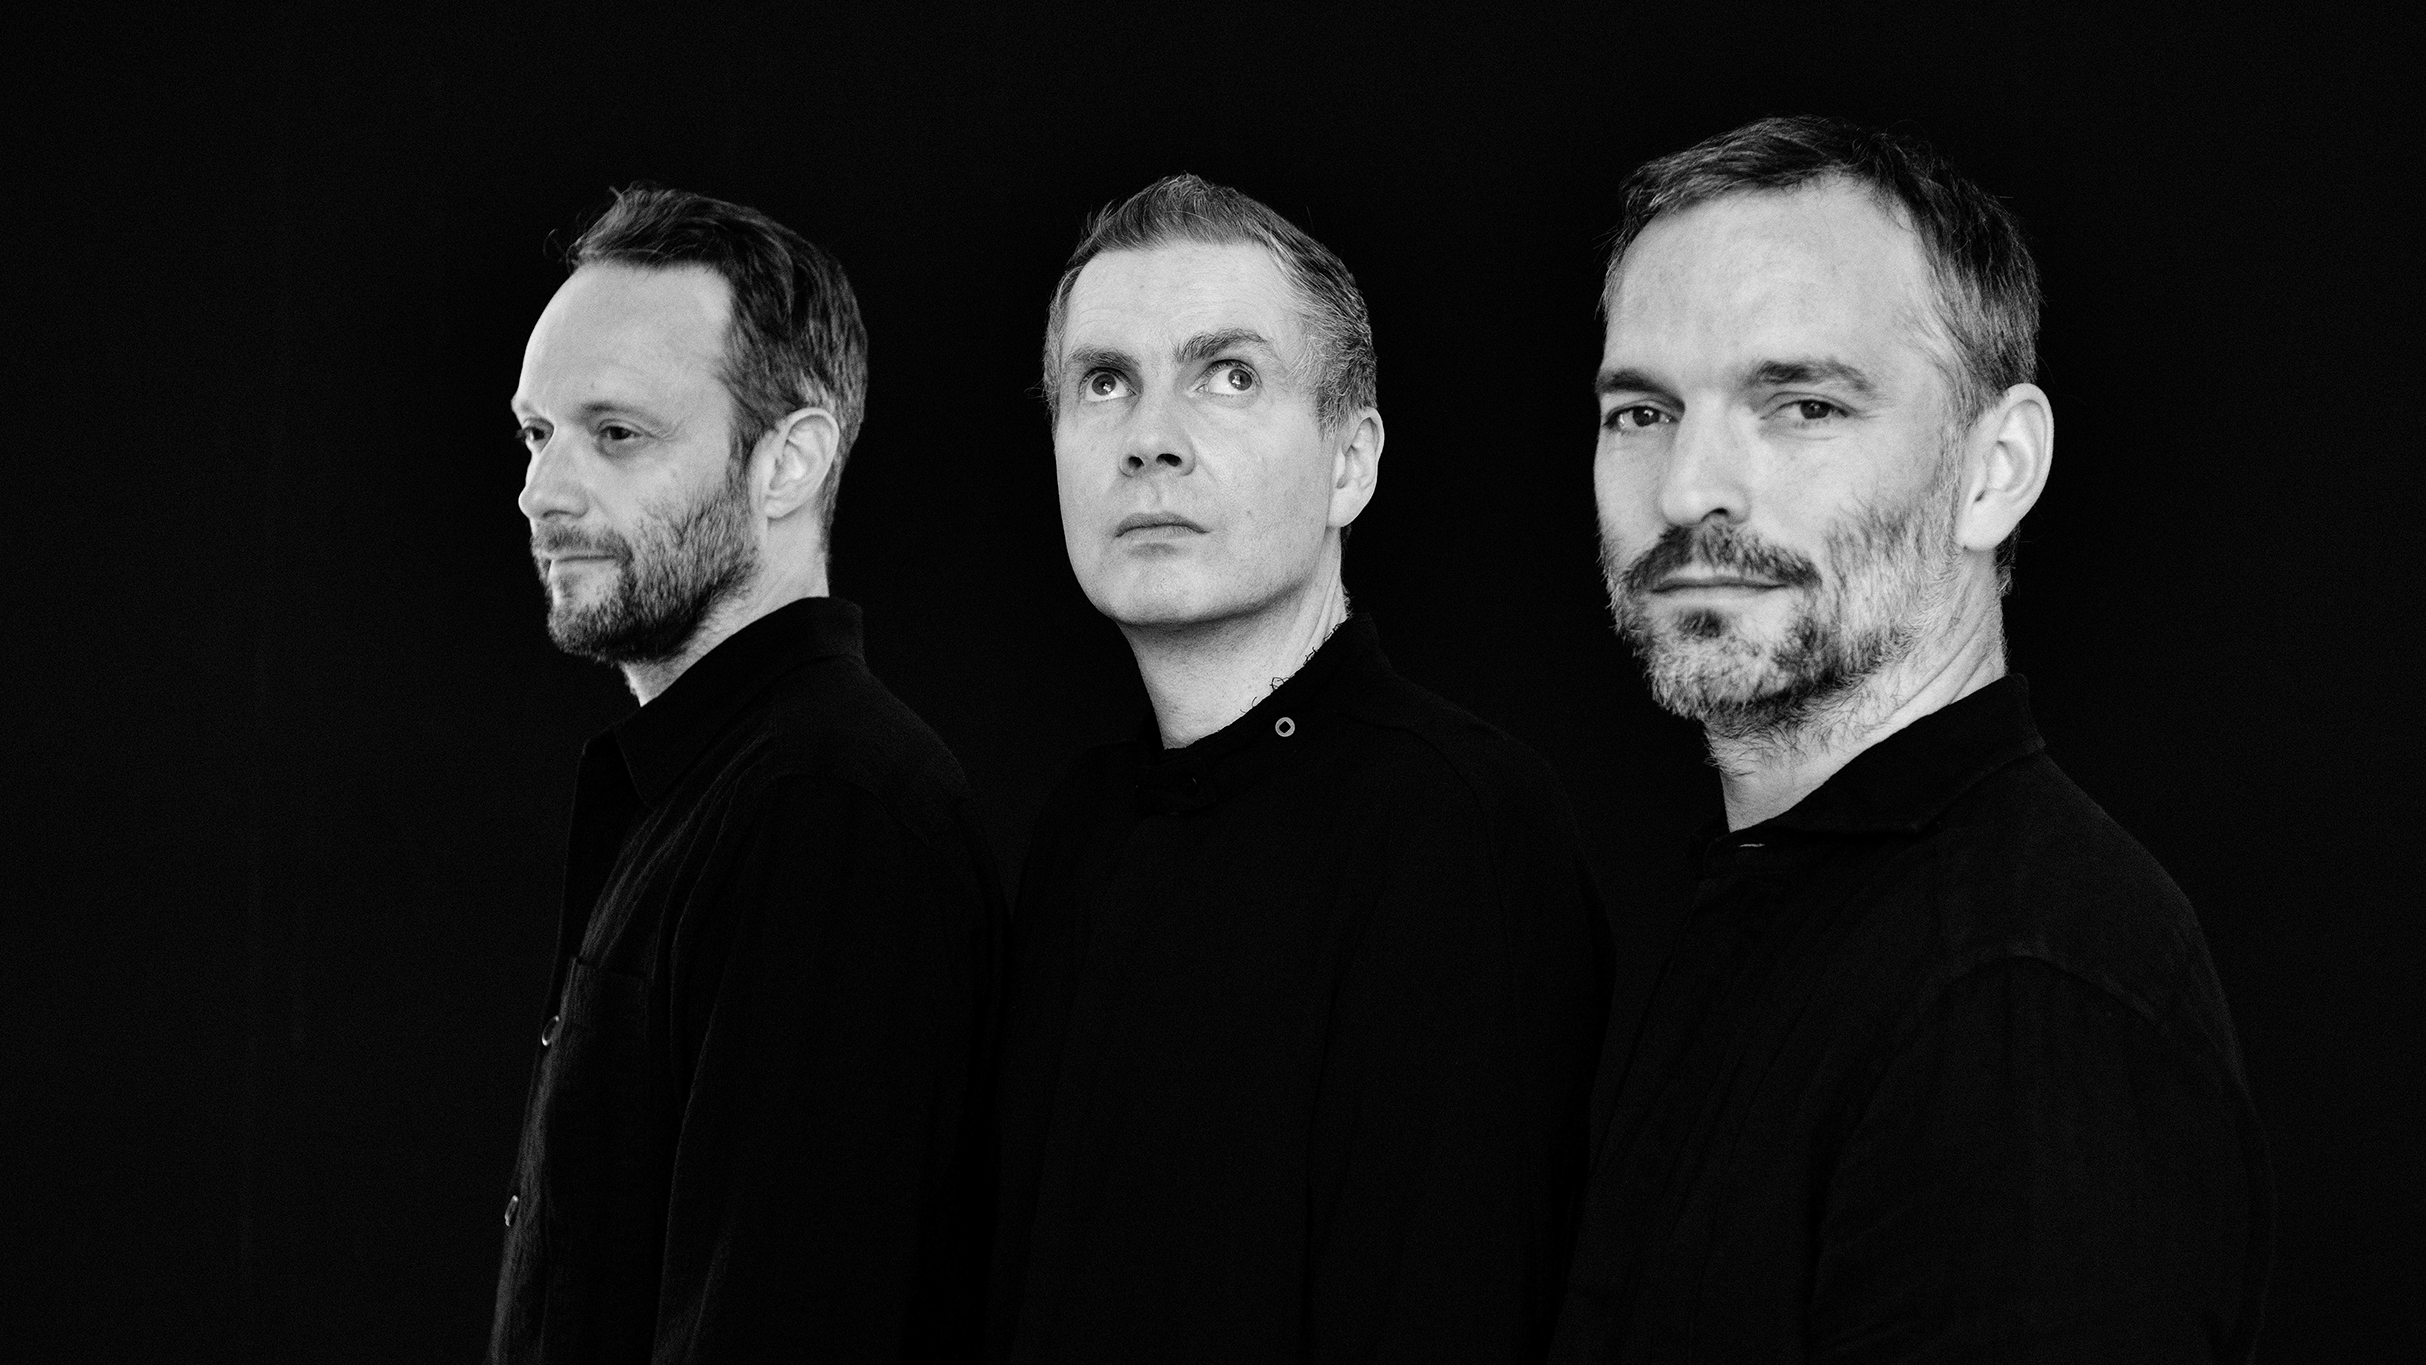 WXPN WELCOMES SIGUR RÓS with THE WORDLESS ORCHESTRA